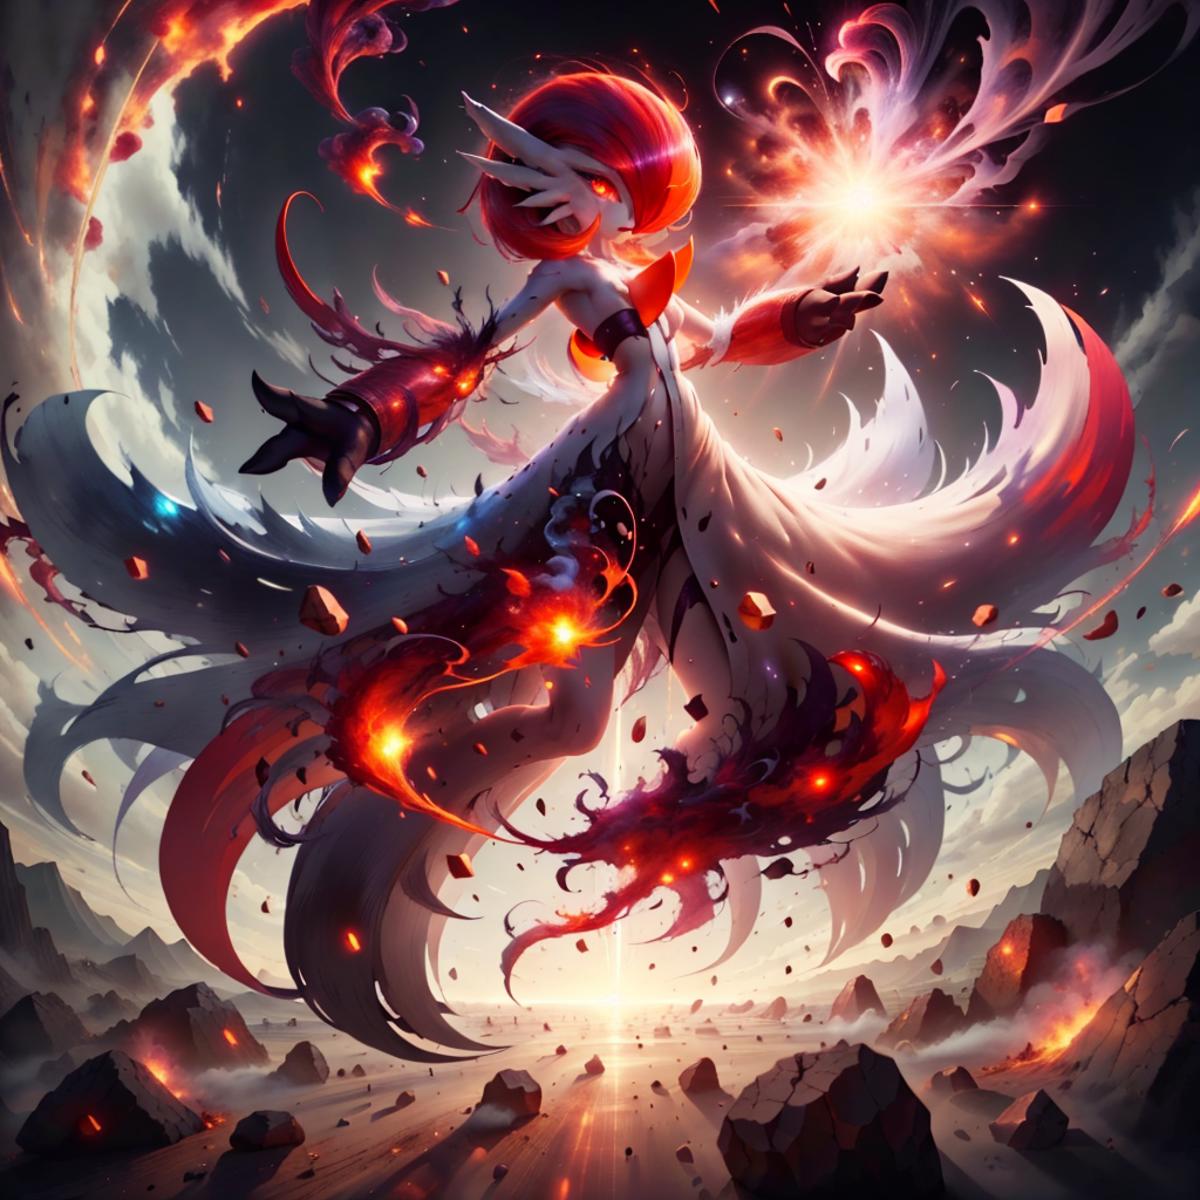 A fantasy artwork featuring a woman with red hair and wings, surrounded by flames and holding a magical sphere.